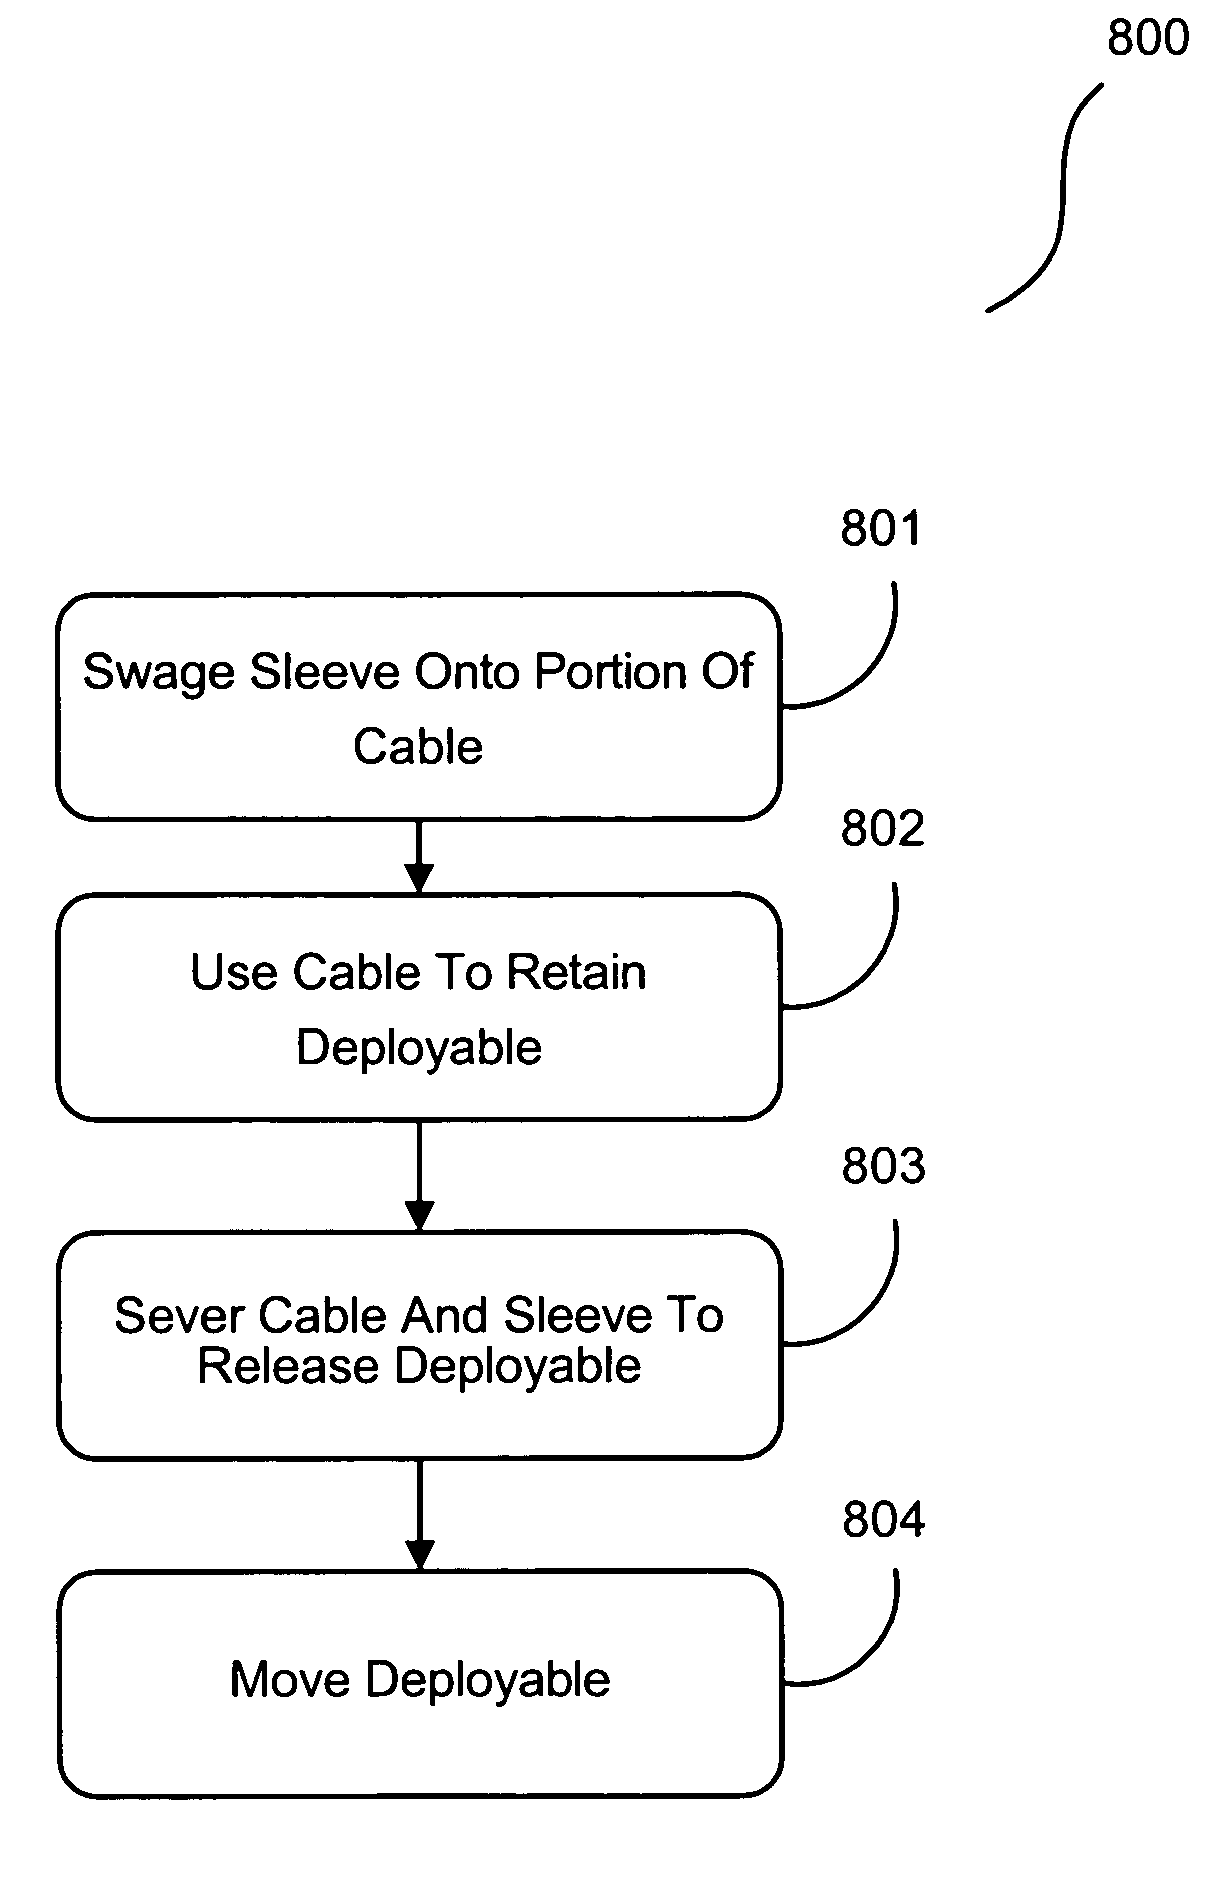 Swaged cable deployment in space